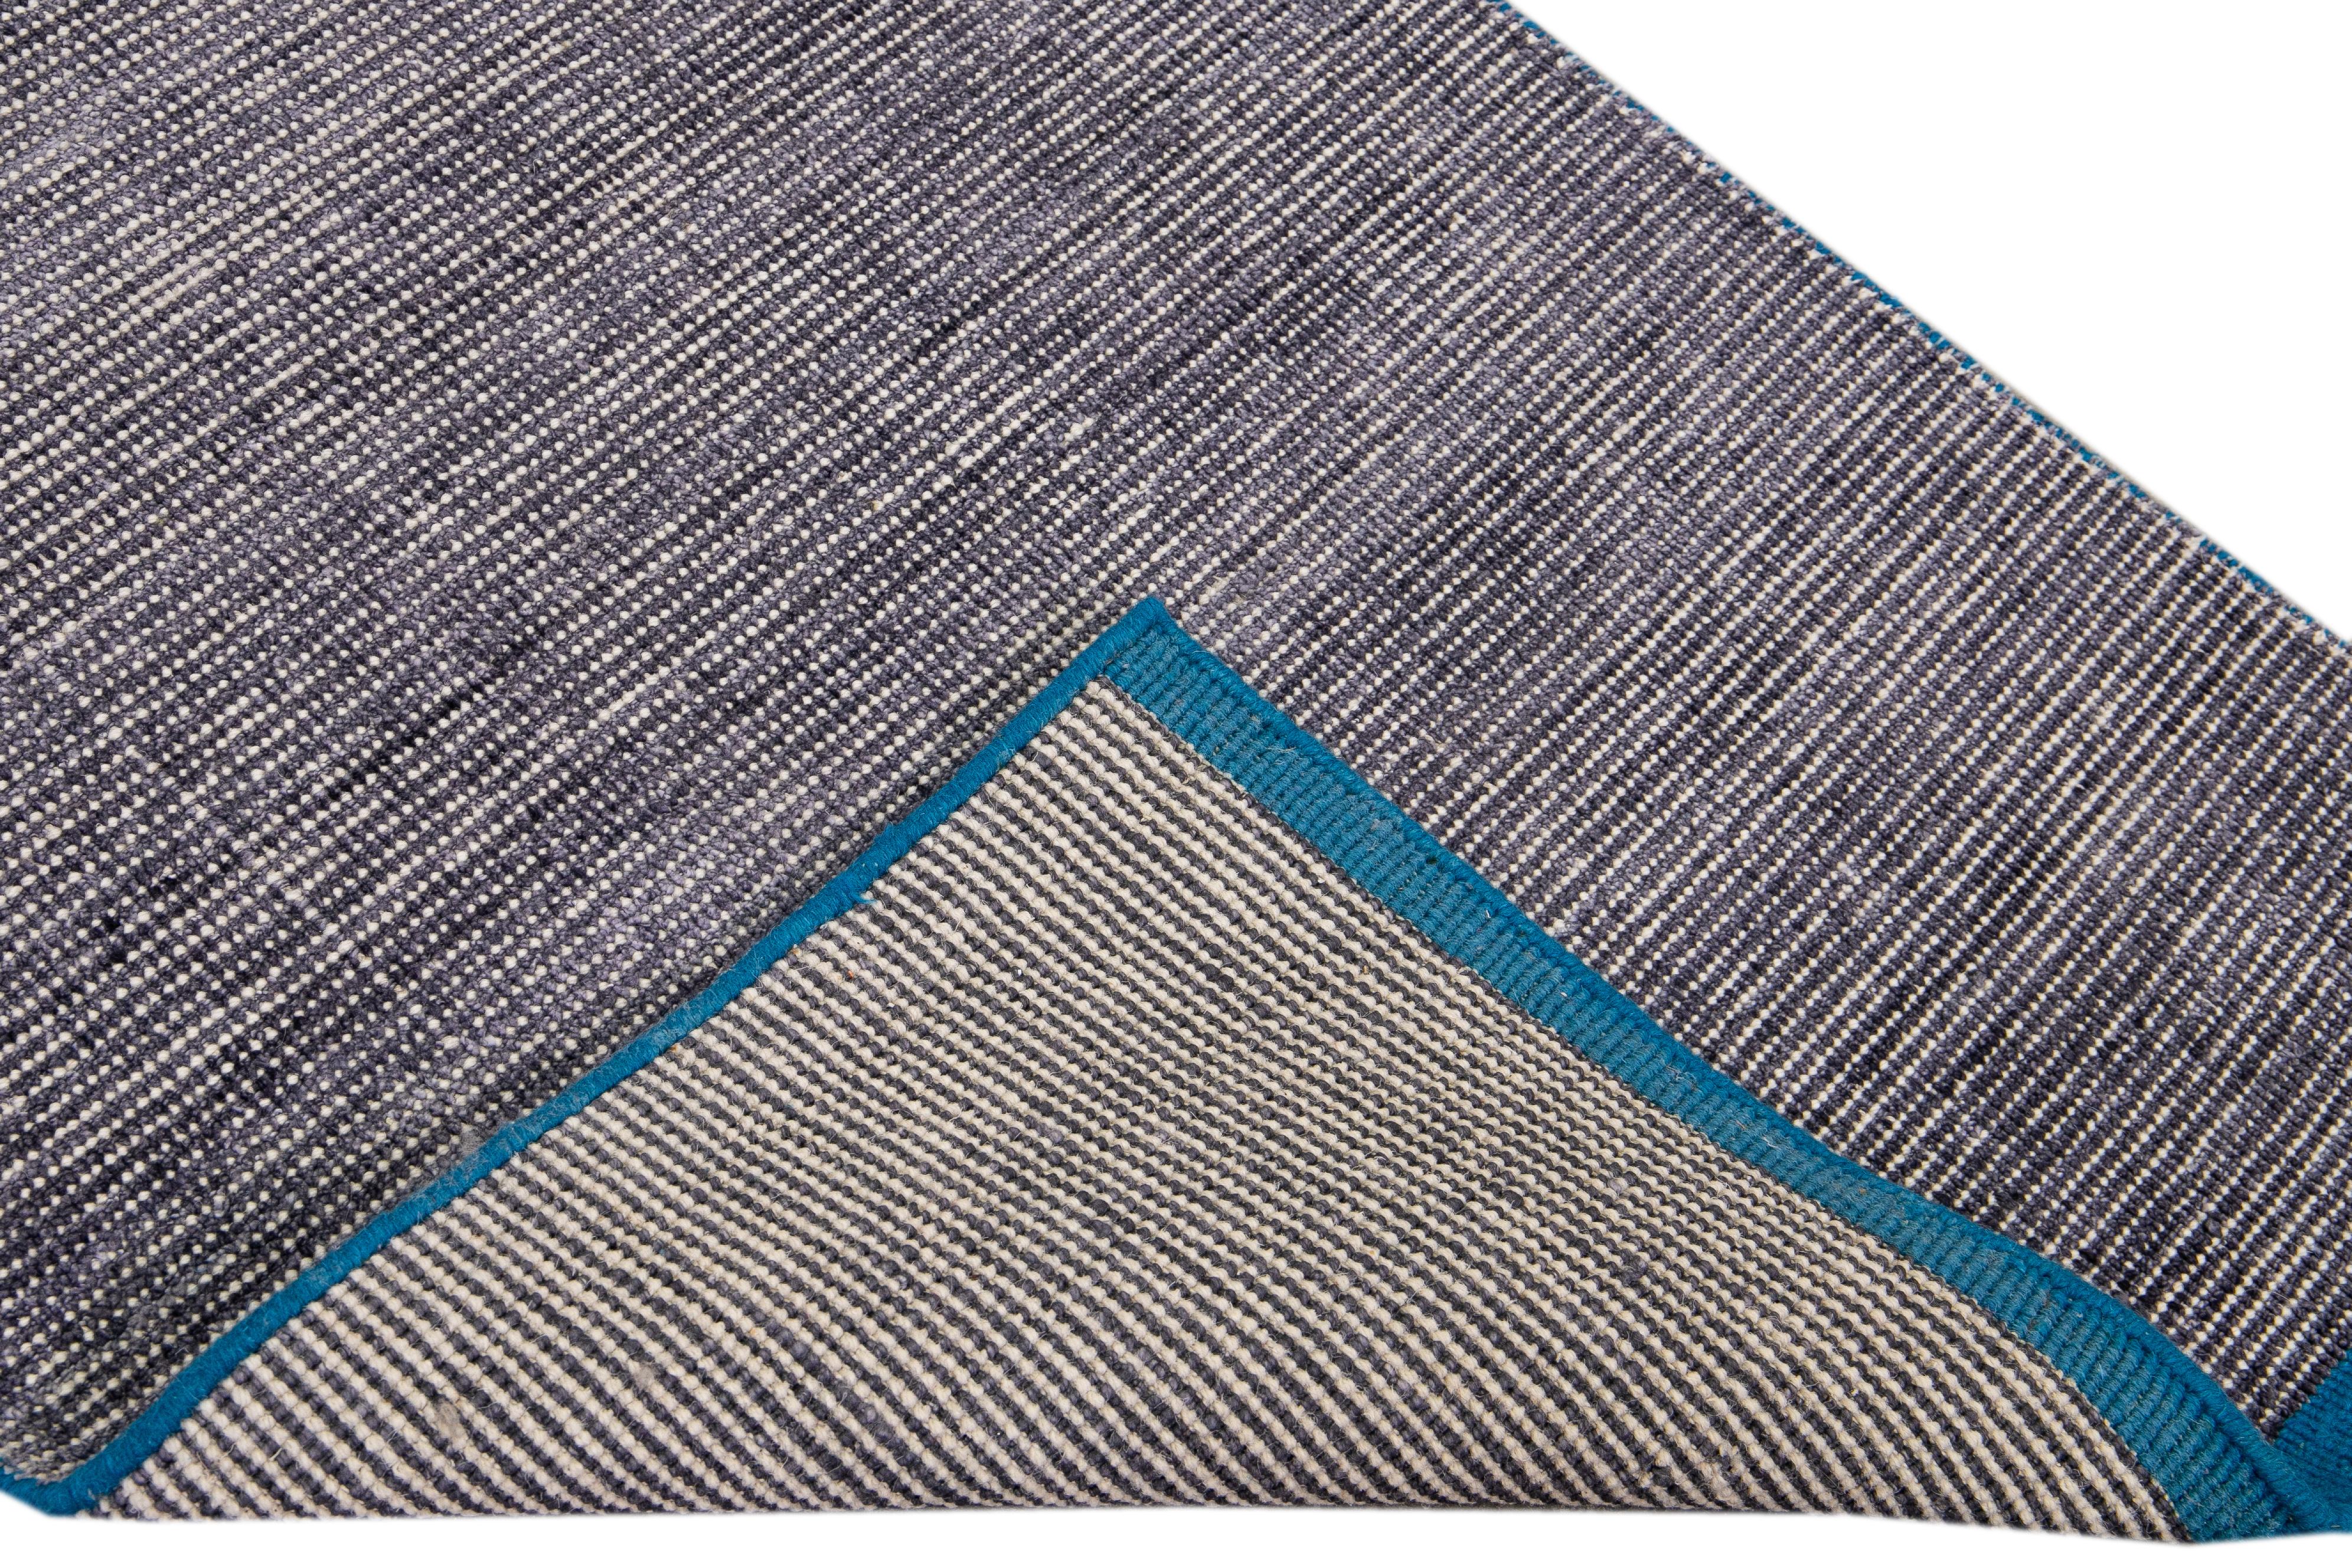 Beautiful modern Handmade Indian bamboo and silk boho rug with a gray field. This Groove Collection Rug has a teal frame in an all-over solid design.

This rug measures: 3'0